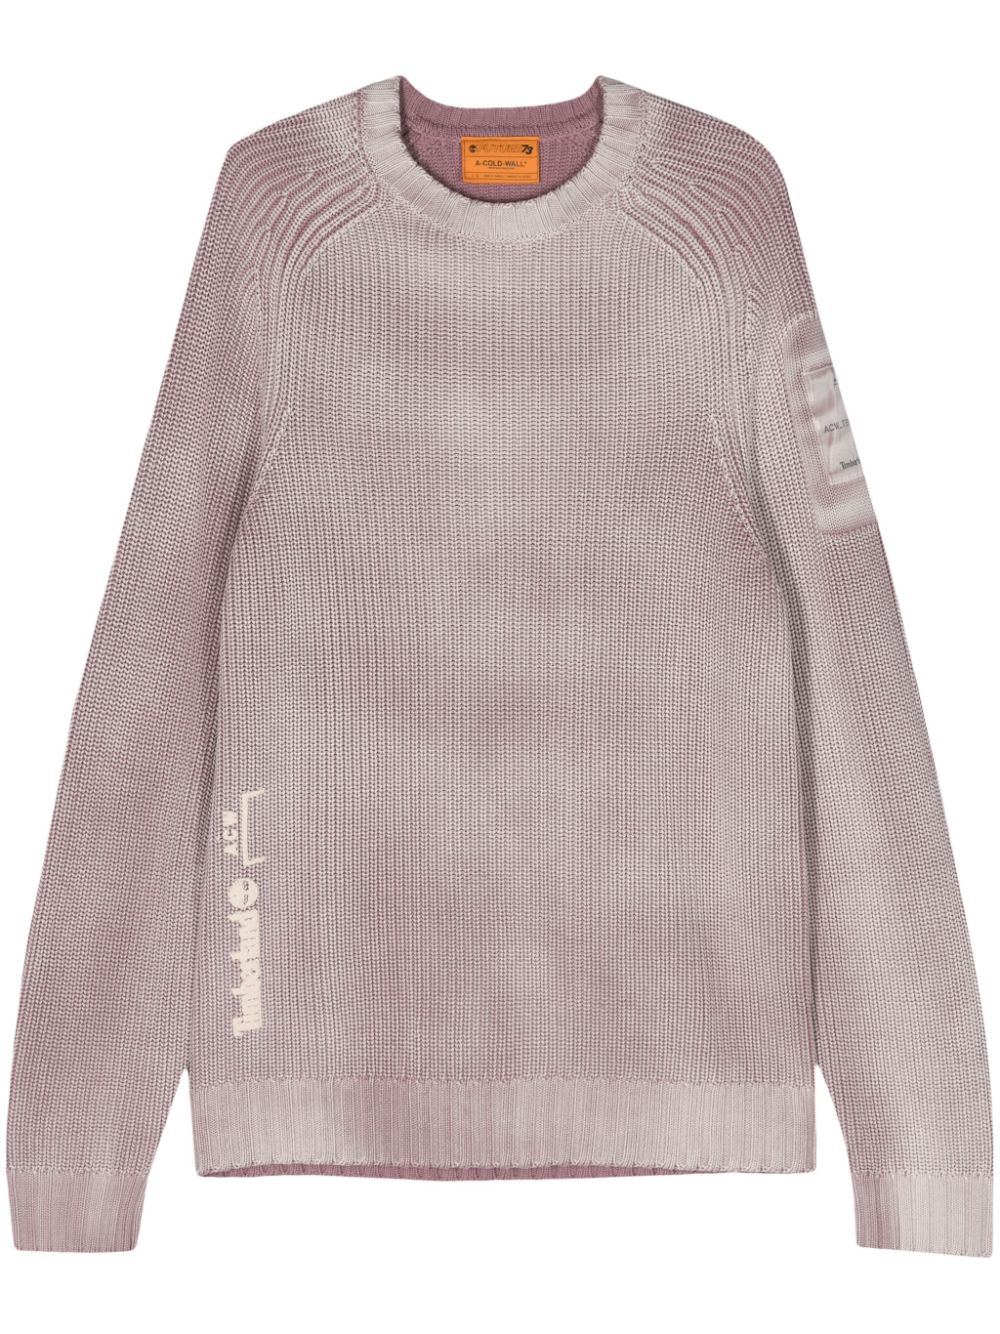 A-COLD-WALL* x Timberland® Future73 logo-embossed jumper - Purple von A-COLD-WALL*